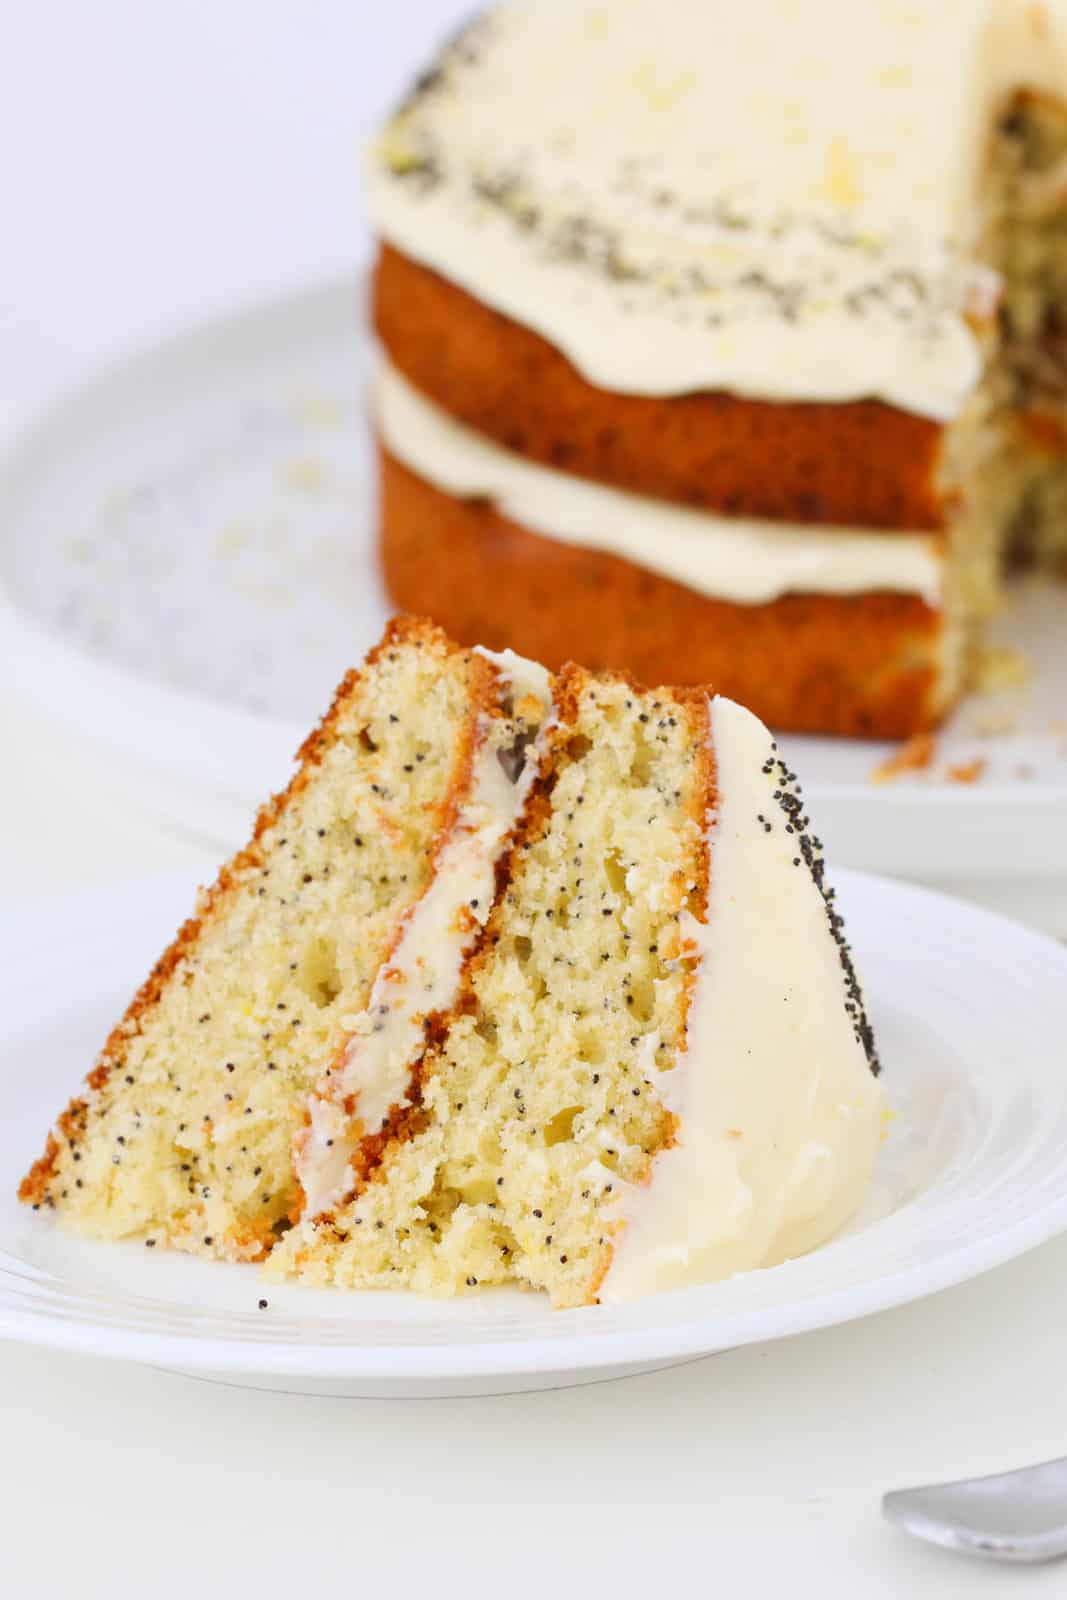 A slice of double layered lemon cake with poppy seeds and cream cheese frosting.